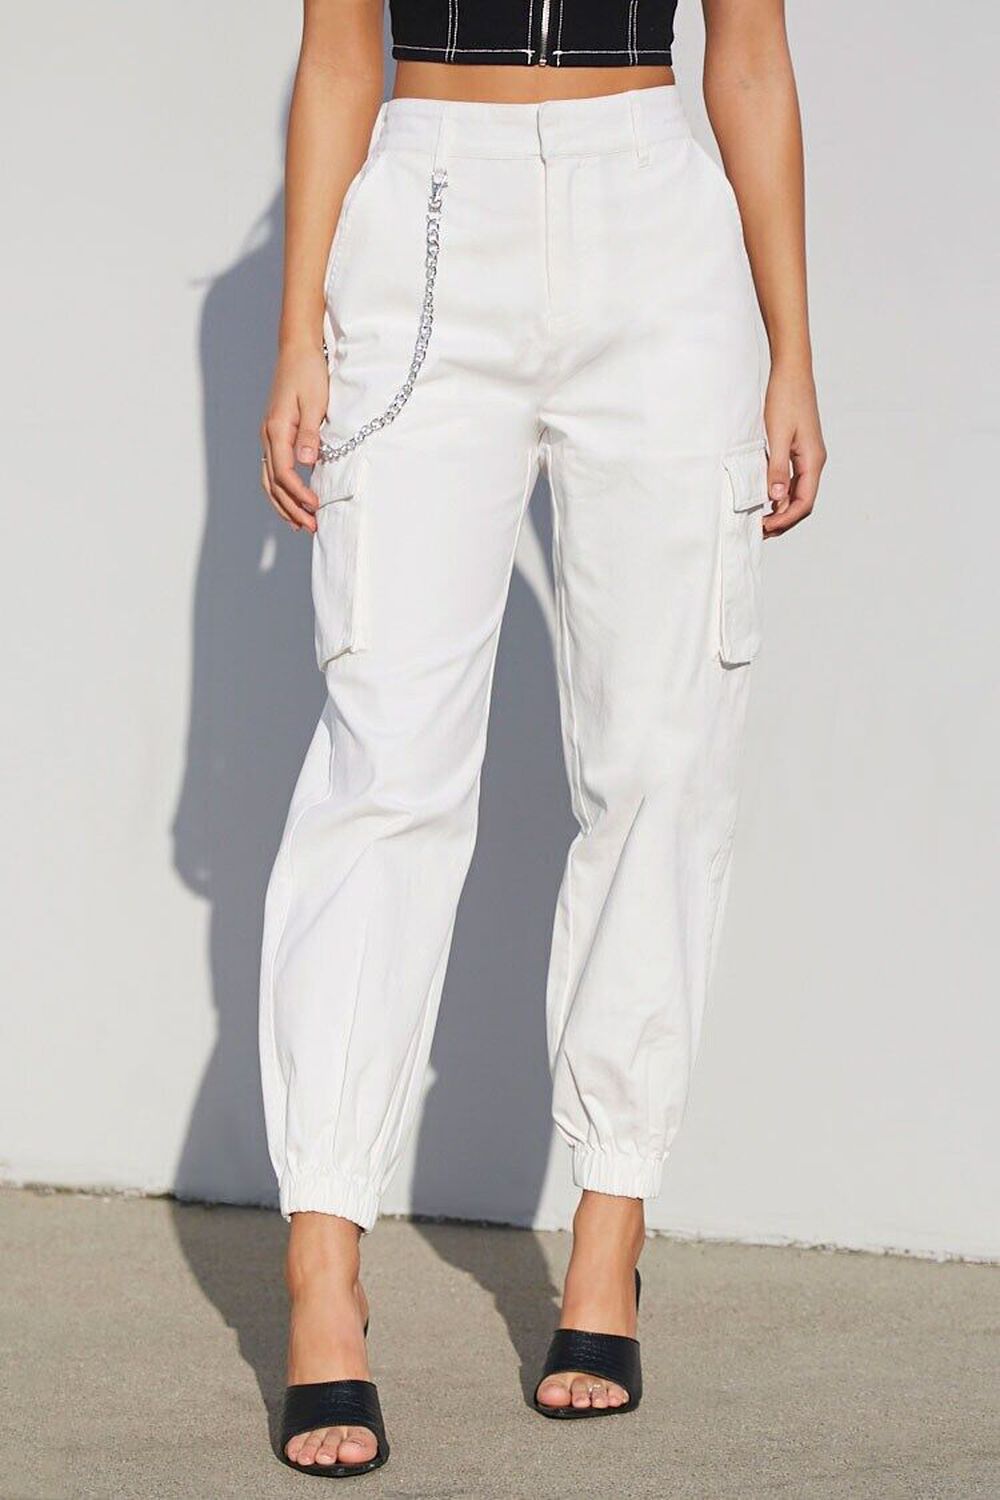 IVORY Londyn Curb Chain Cargo Pants, image 2